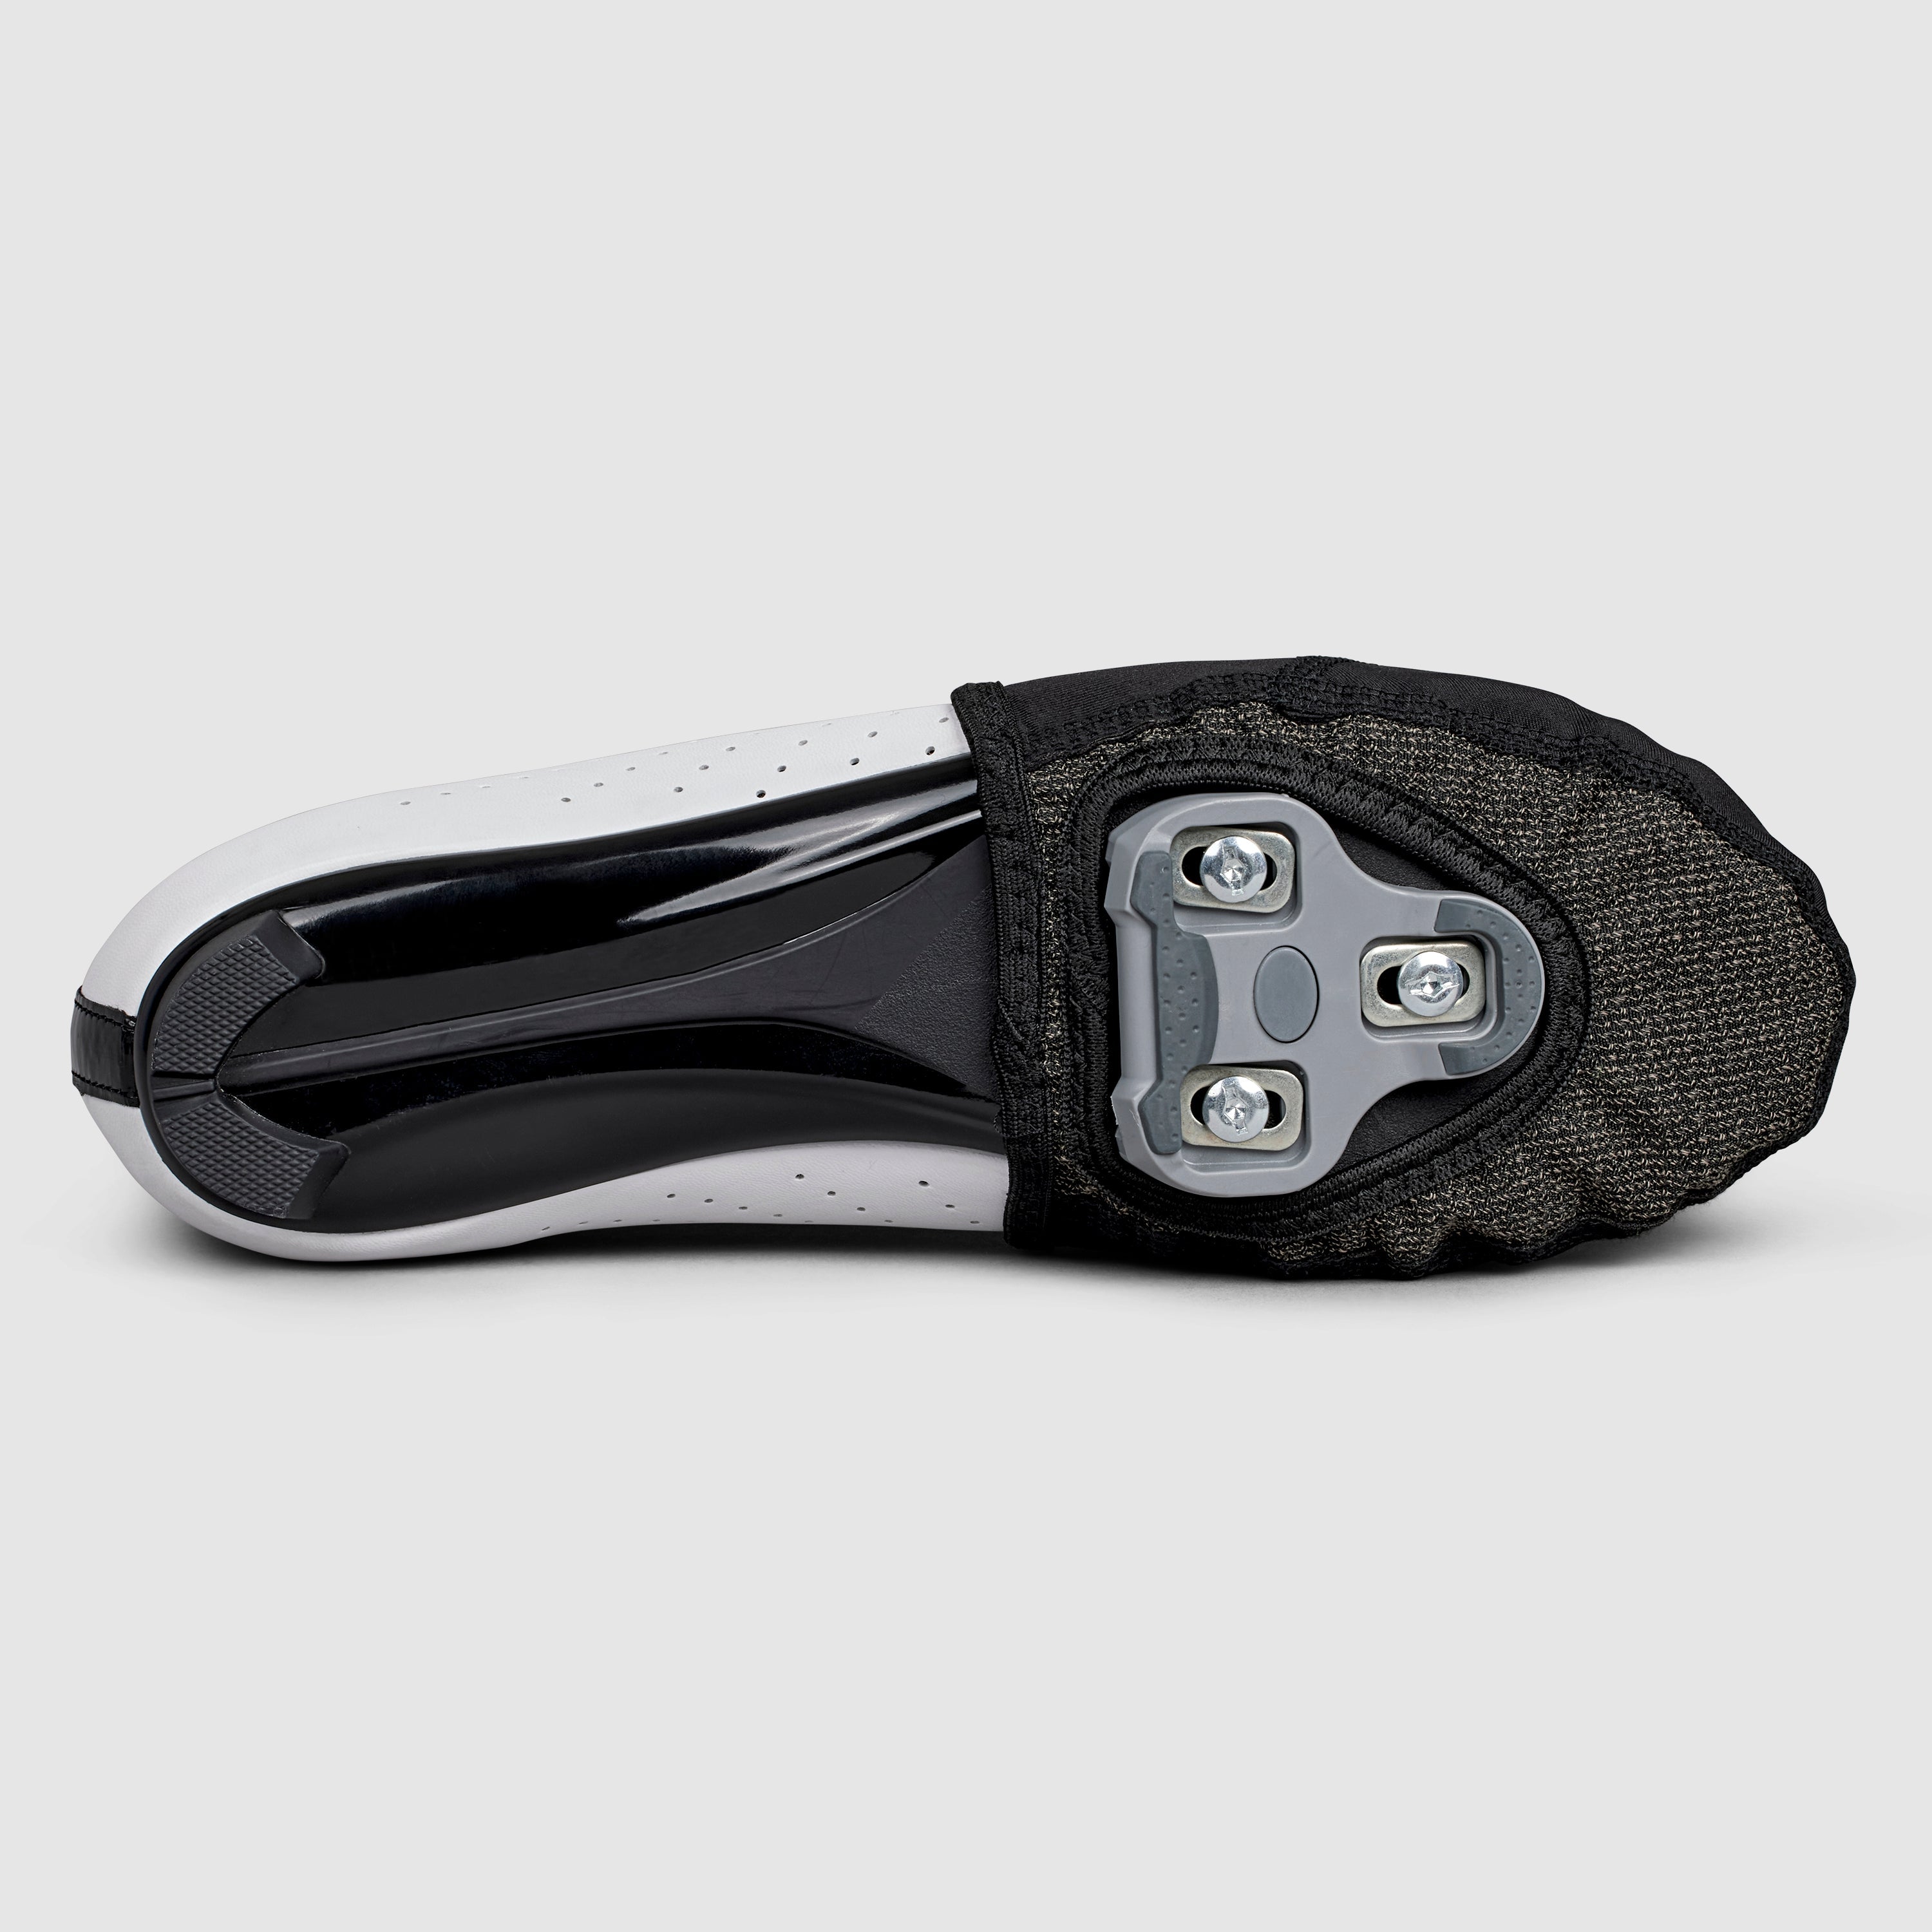 Gripgrab Windproof Toe Covers